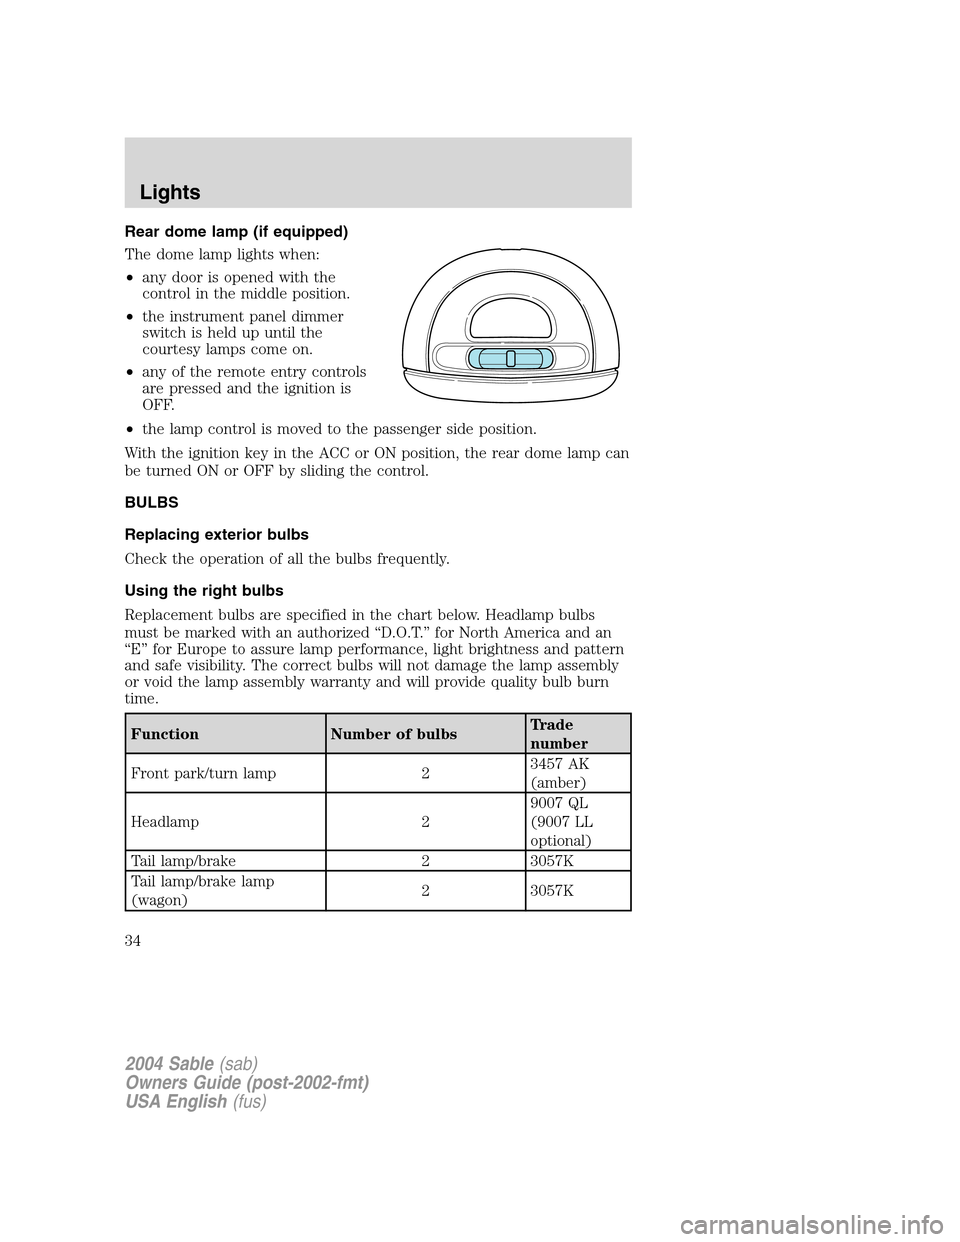 Mercury Sable 2004  Owners Manuals Rear dome lamp (if equipped)
The dome lamp lights when:
•any door is opened with the
control in the middle position.
•the instrument panel dimmer
switch is held up until the
courtesy lamps come on